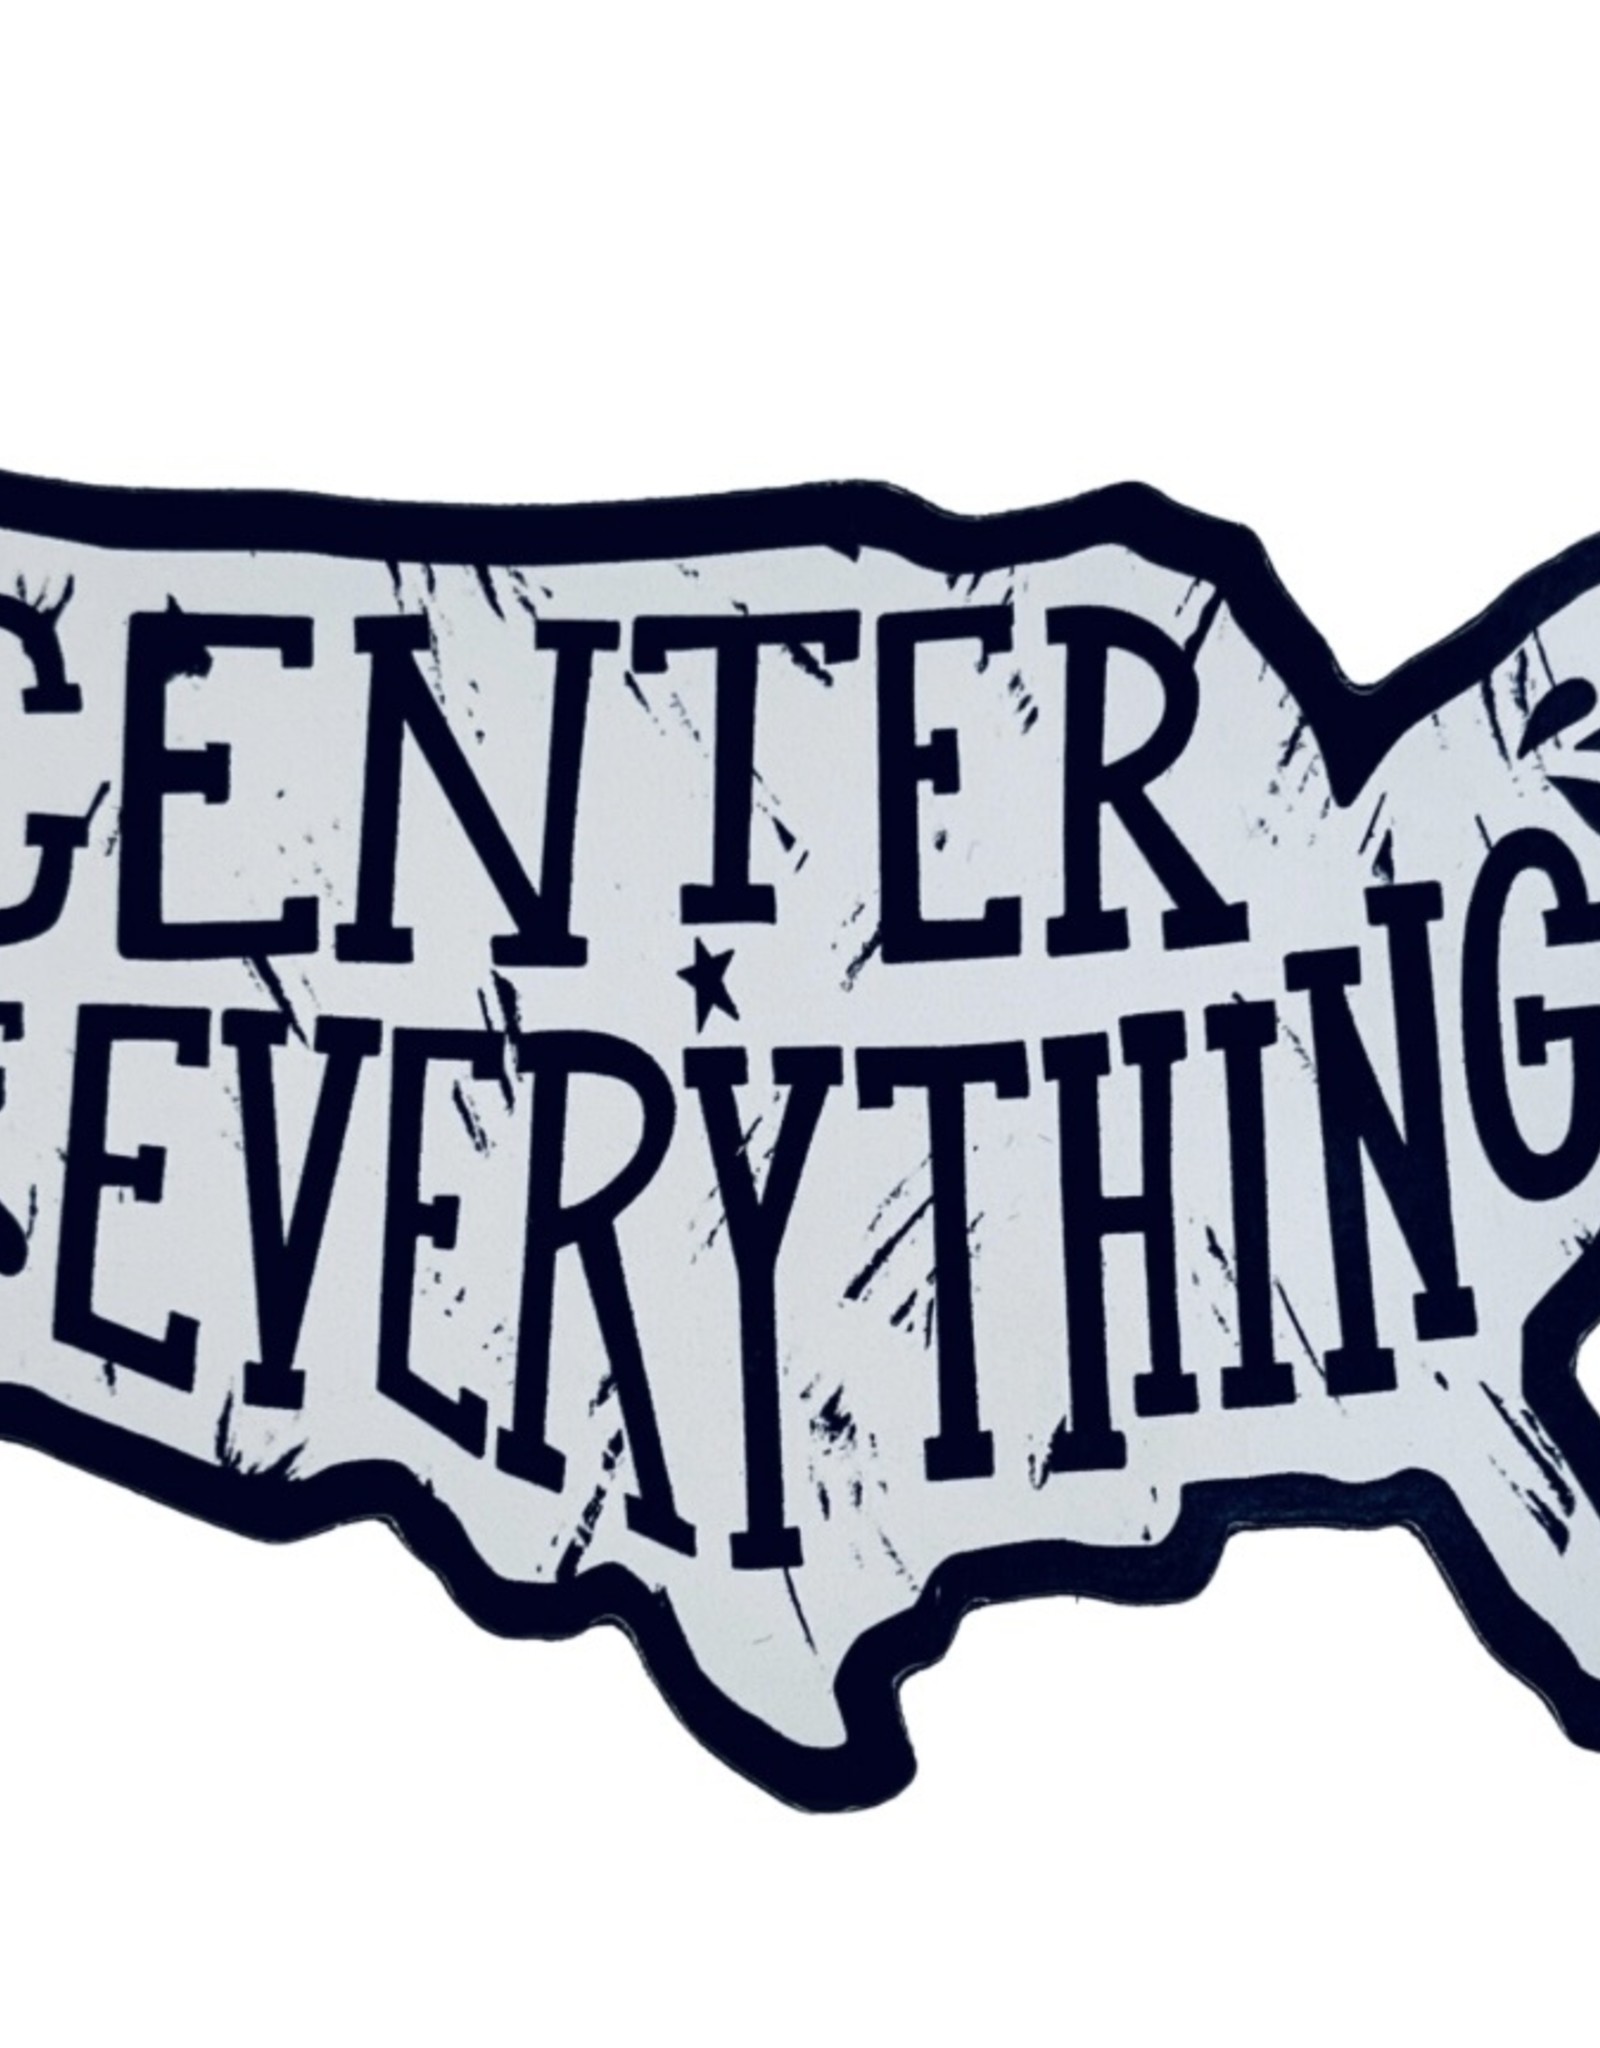 Consignment "Center of Everything" Magnet